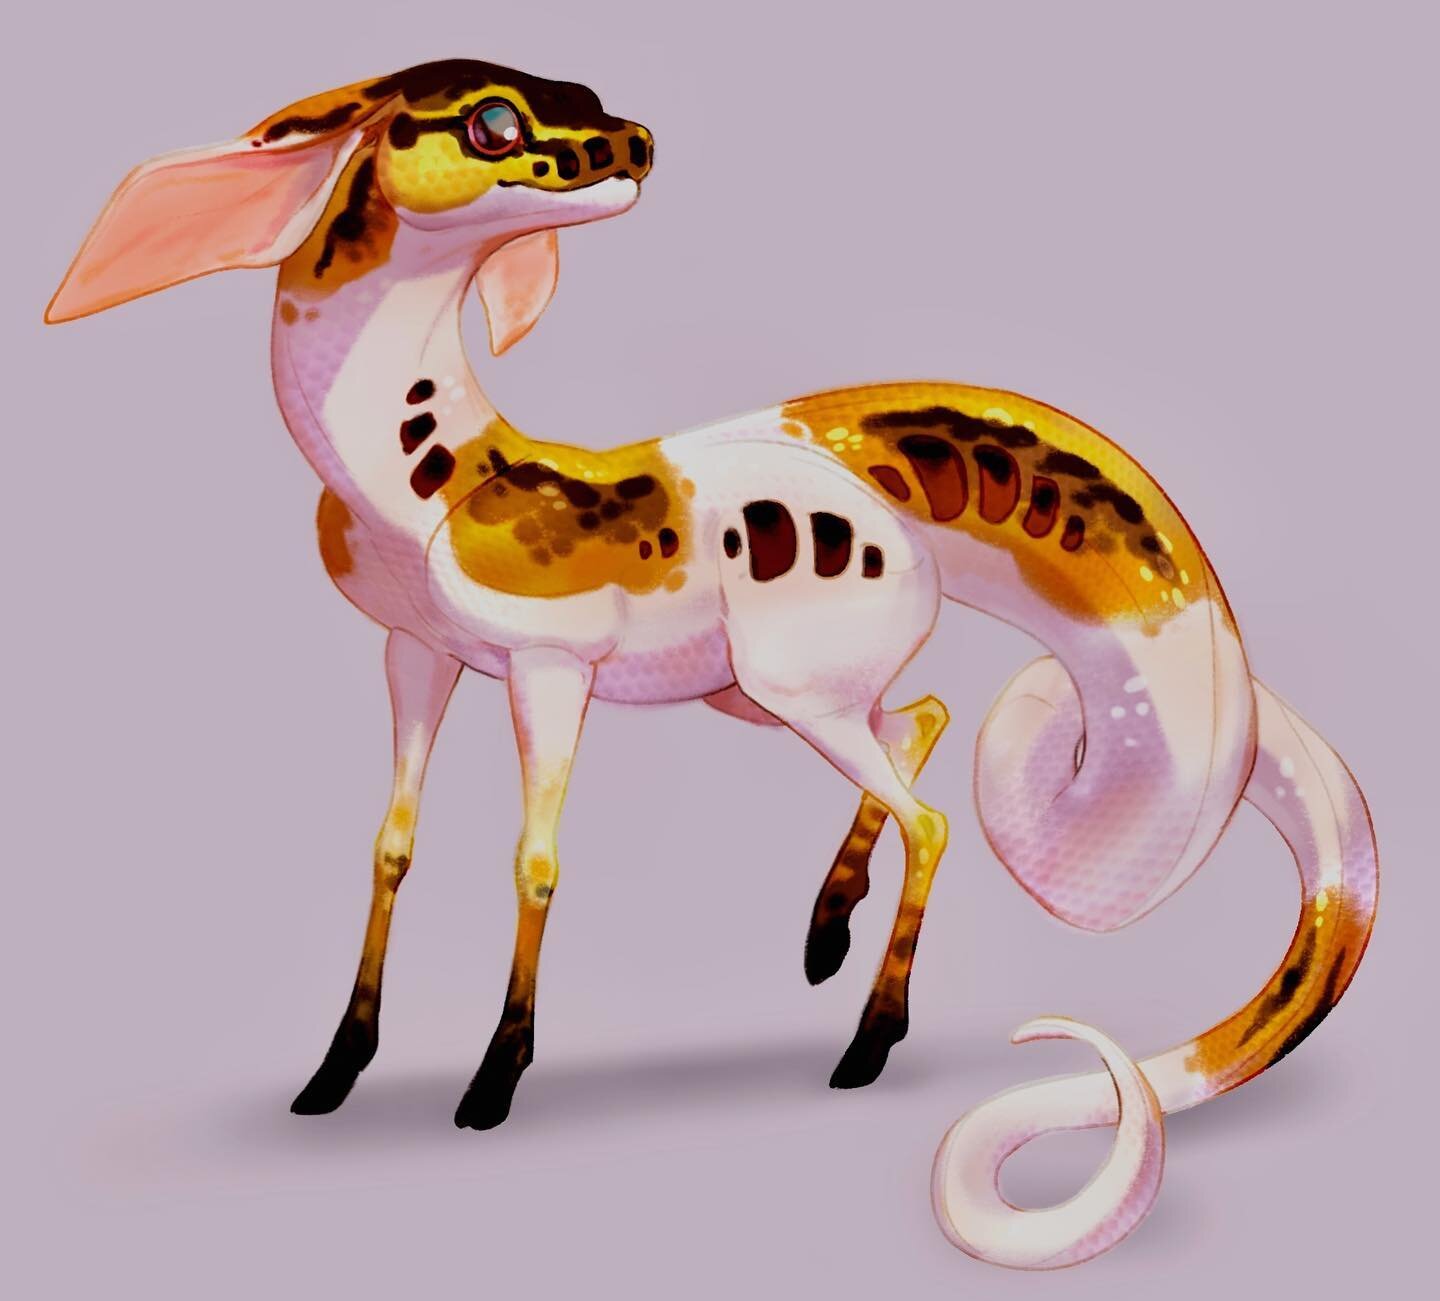 Deersnake? 🐍 for some reason when I was thinking of &ldquo;spring&rdquo; animals... ball pyhtons and fawns just have... the same ✨energy ✨ you know? Just me? 😅 Also I had some fun roughing up my concept with some textures and it was very satisfying